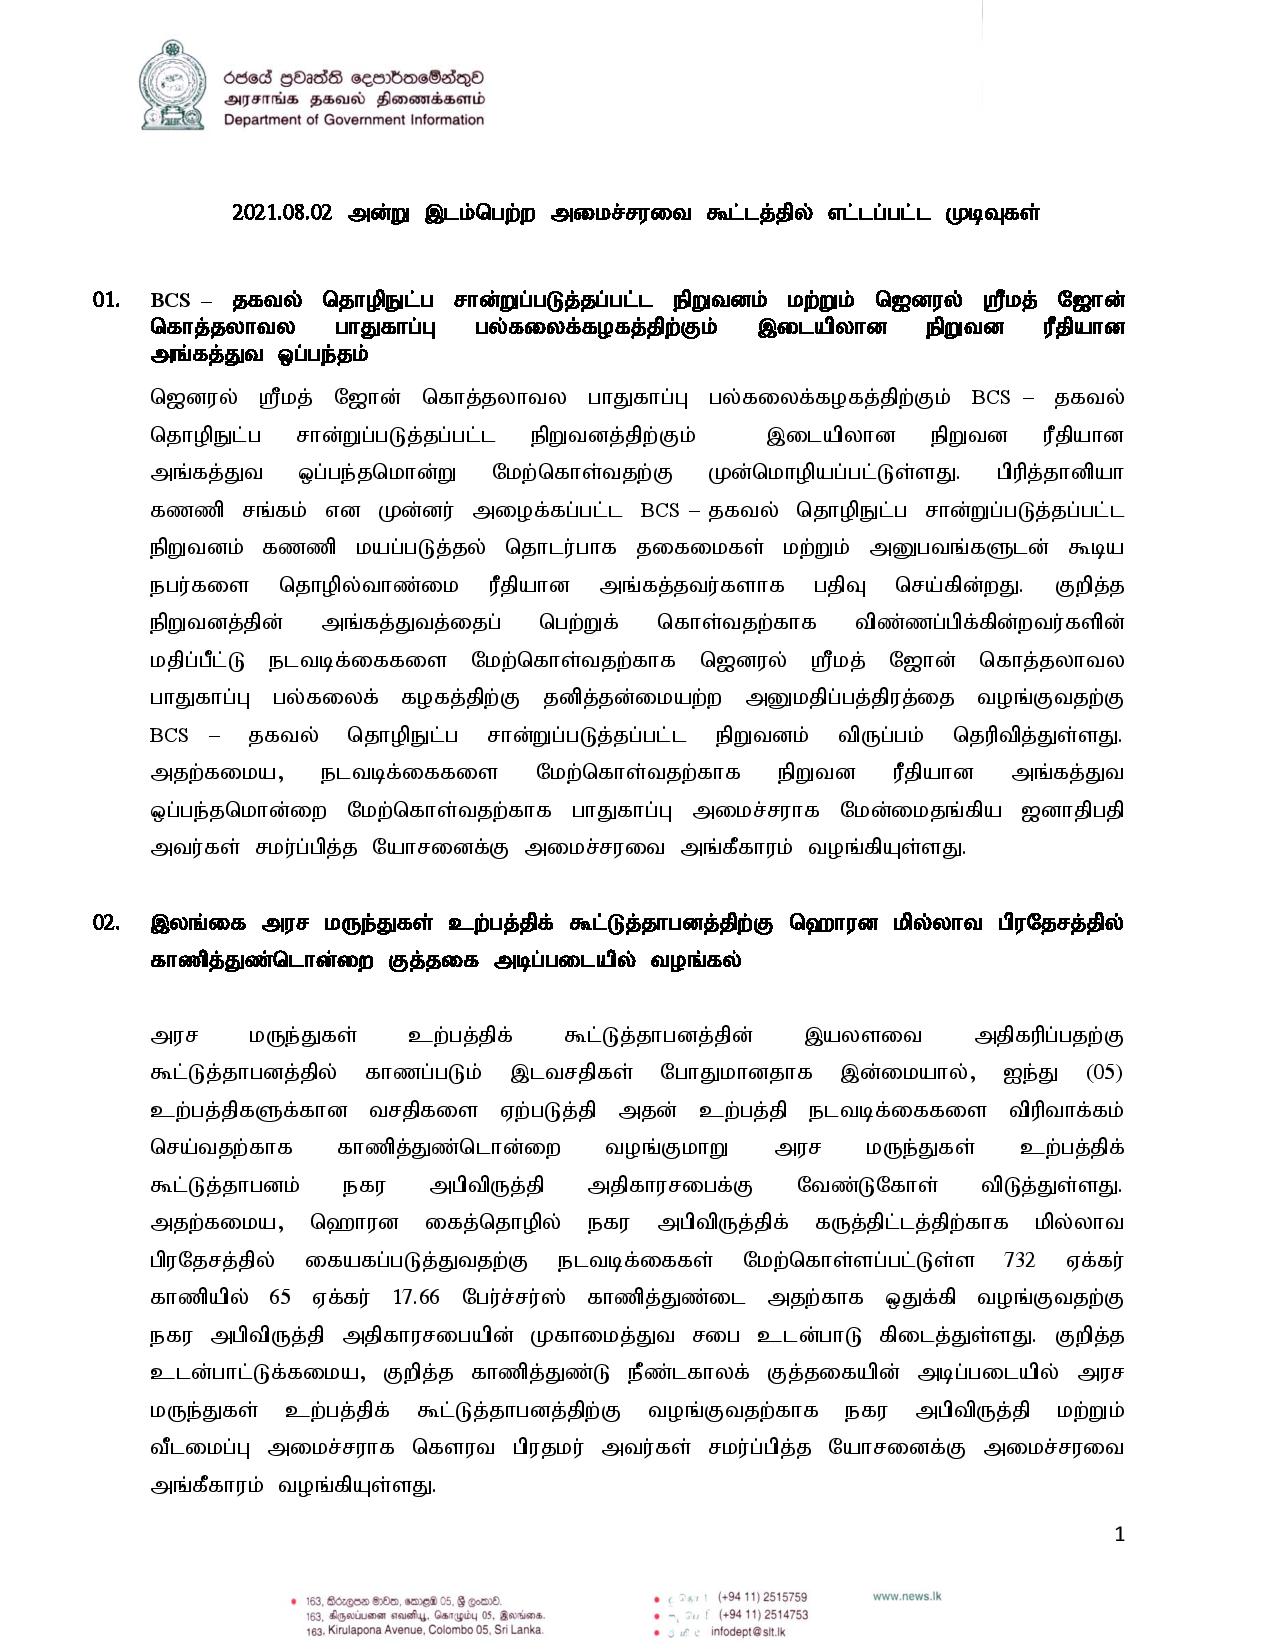 Cabinet Decisions on 02.08.2021 Tamil page 001